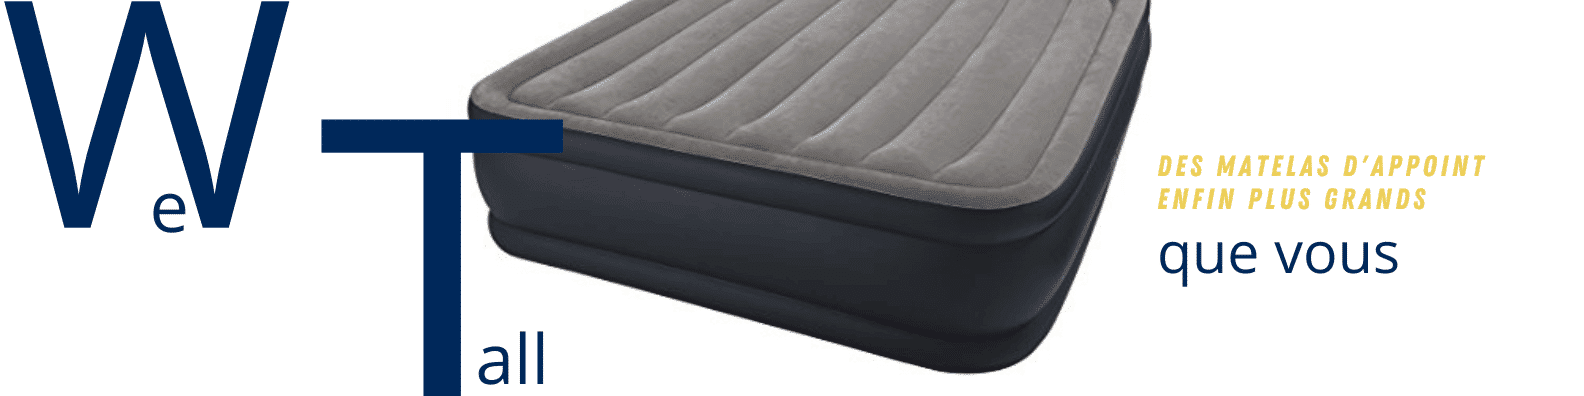 Matelas d'appoint grande taille